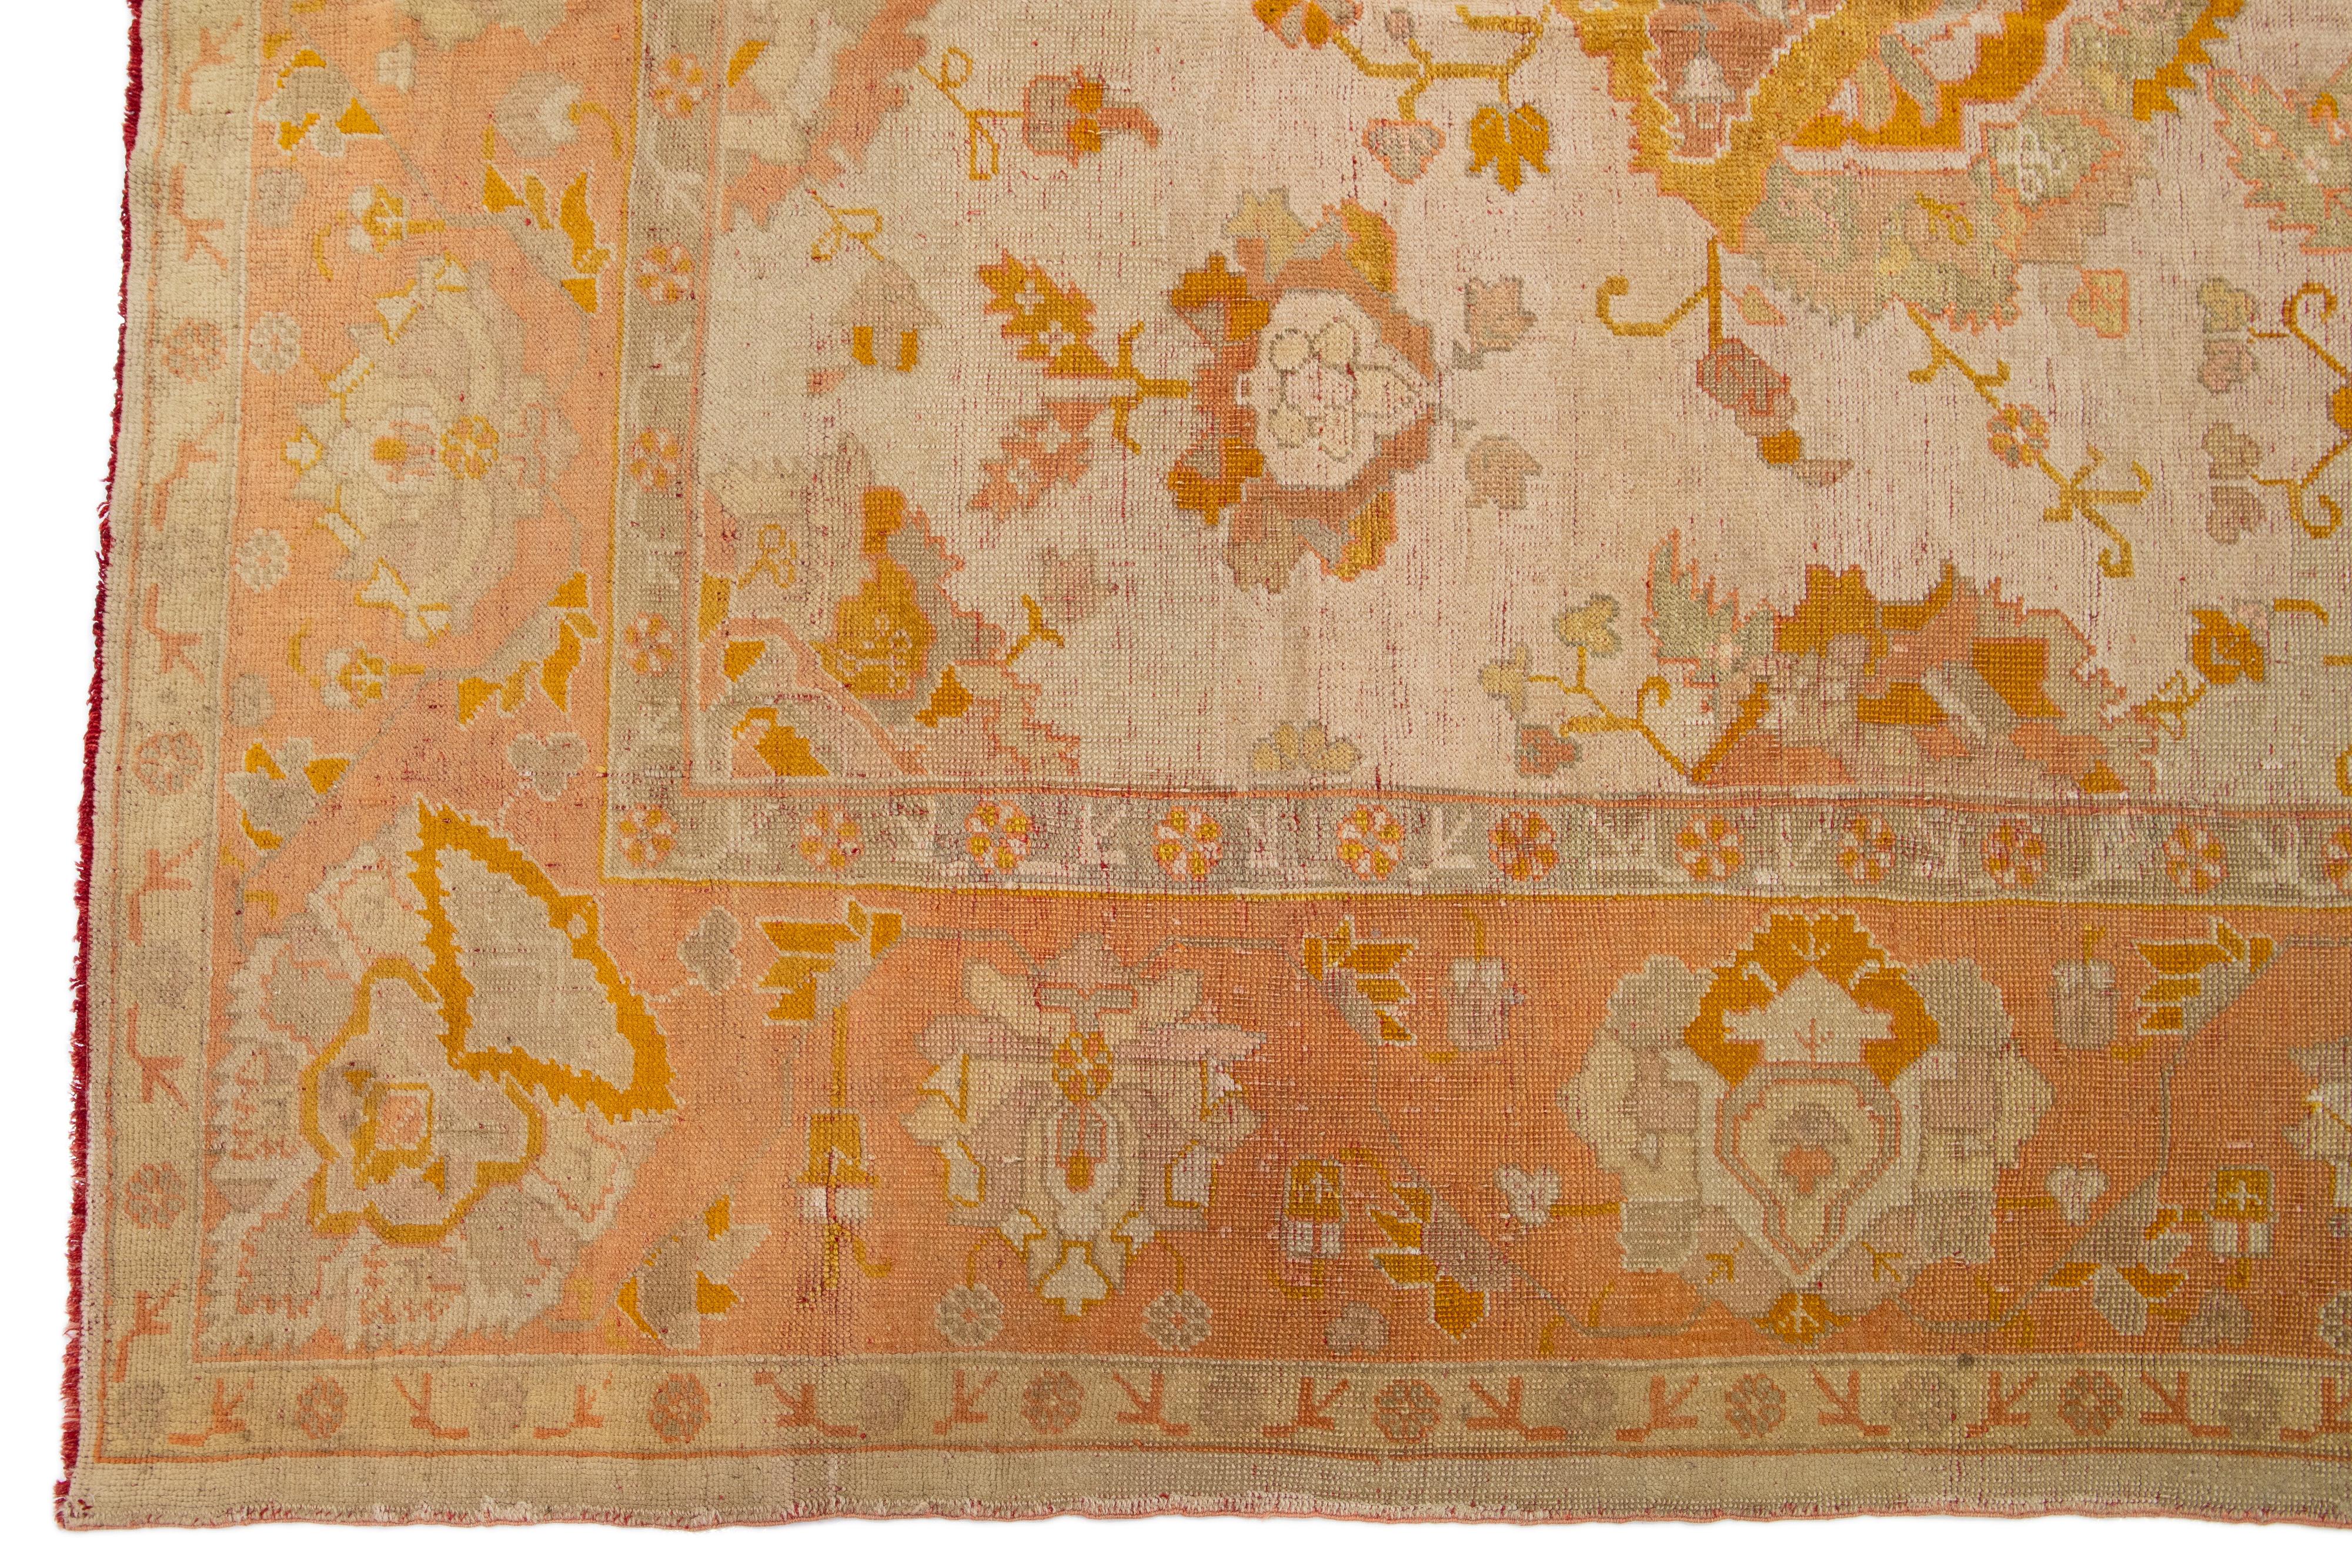 Beautiful Antique Turkish hand-knotted wool rug with a beige color field. This rug has an orange- peach designed frame with accent colors of goldenrod and gray in a gorgeous all-over geometric floral design.

This rug measures: 12'3